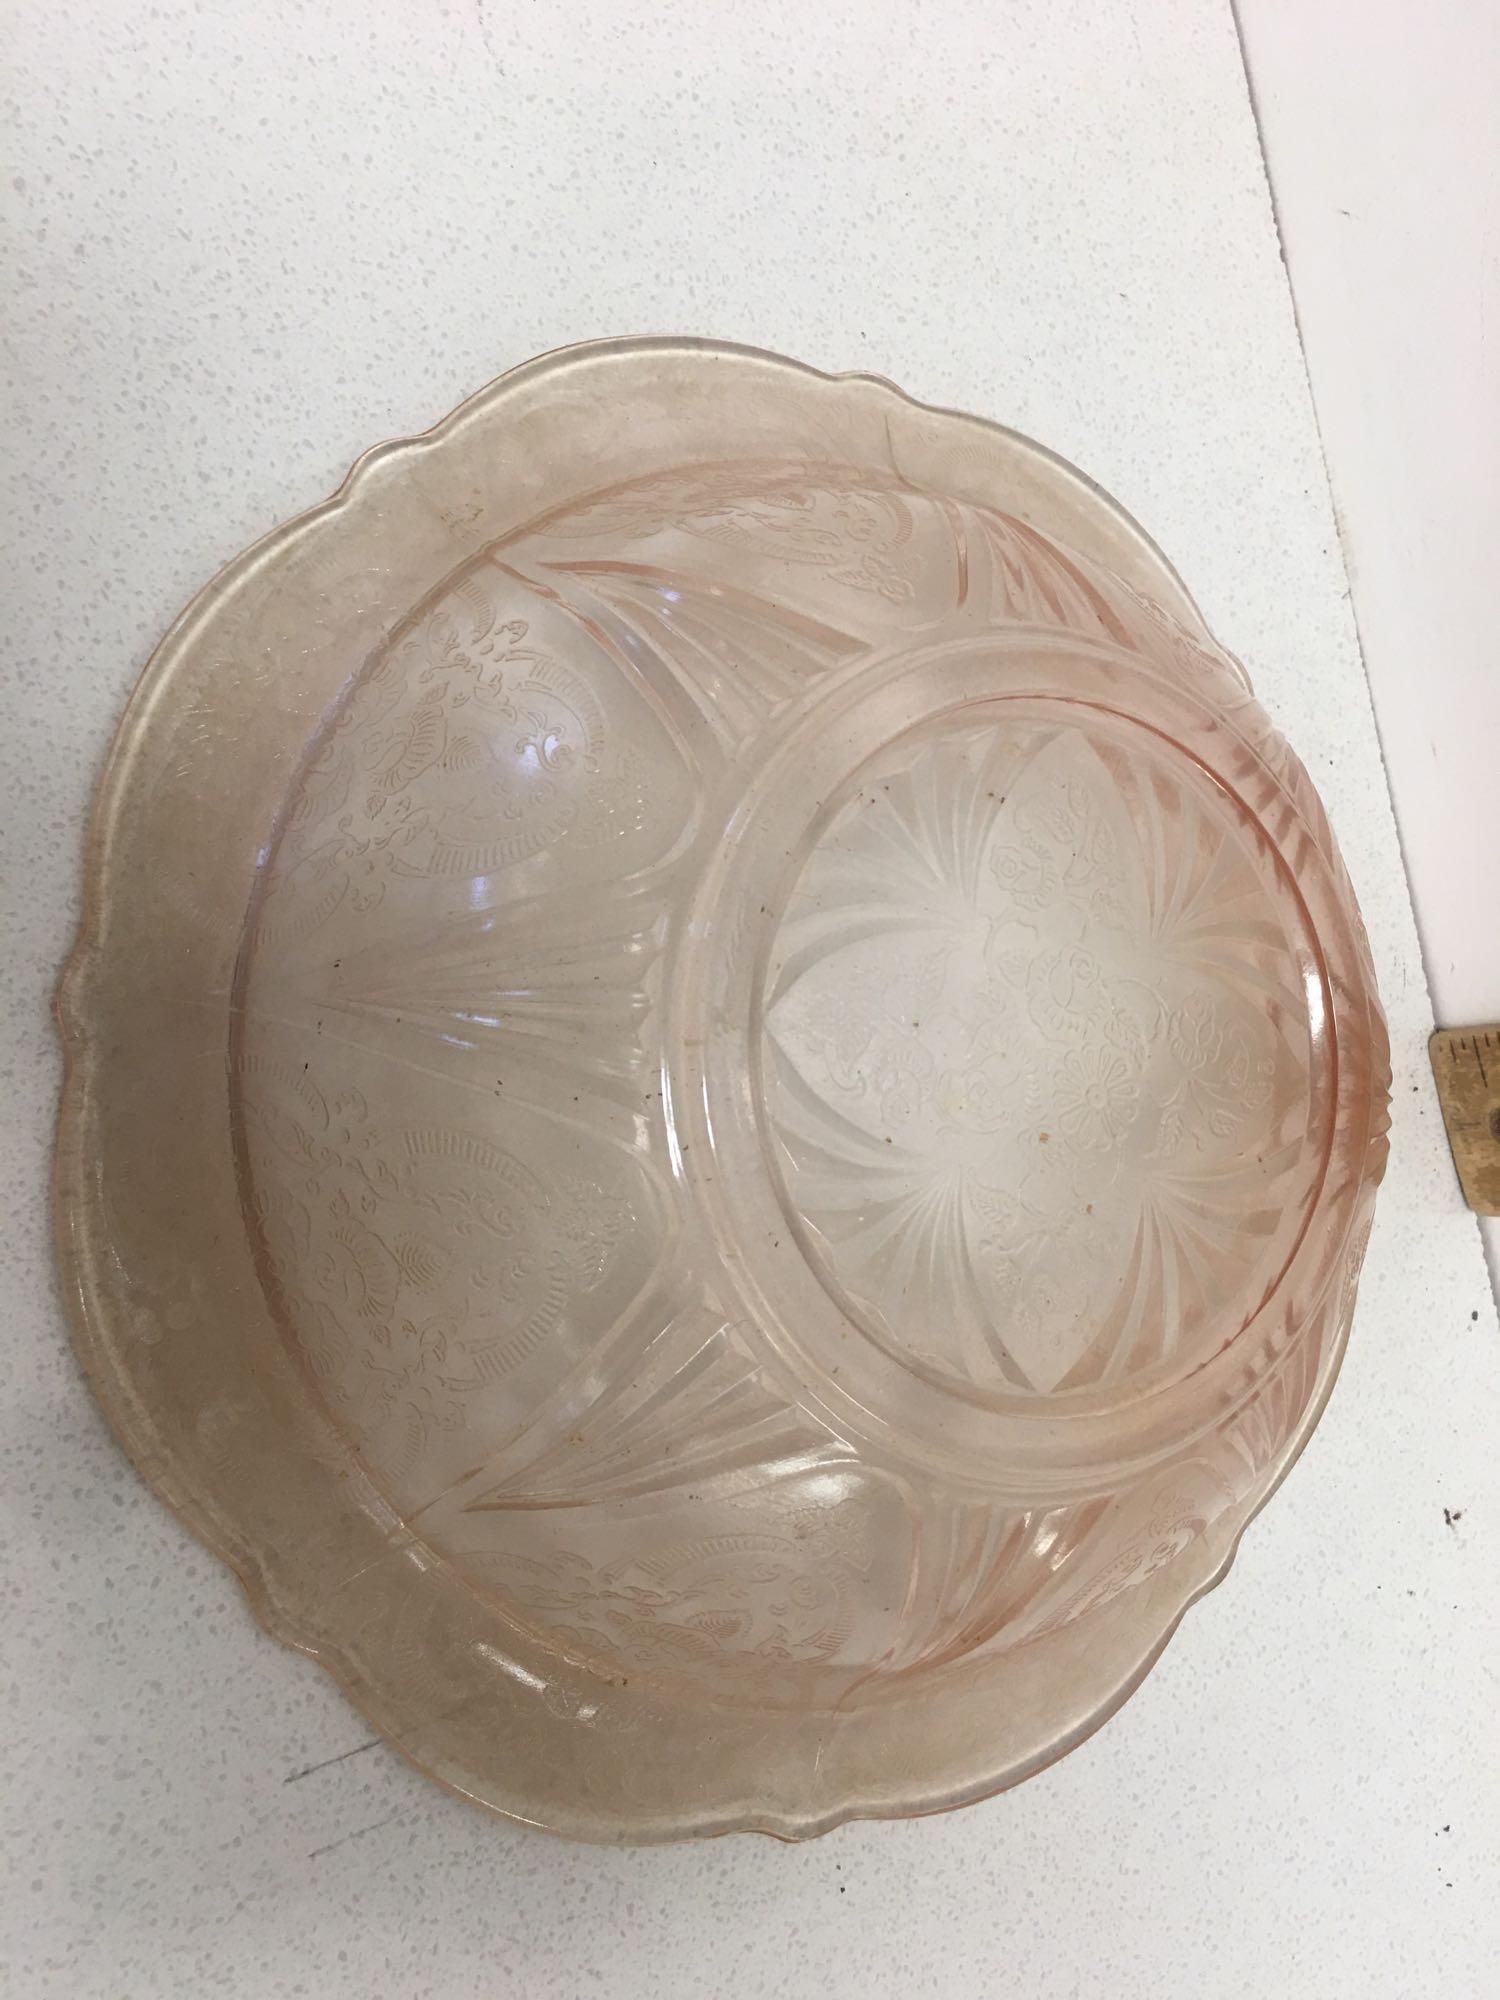 pink depression glass serving bowl and sugar & cream container